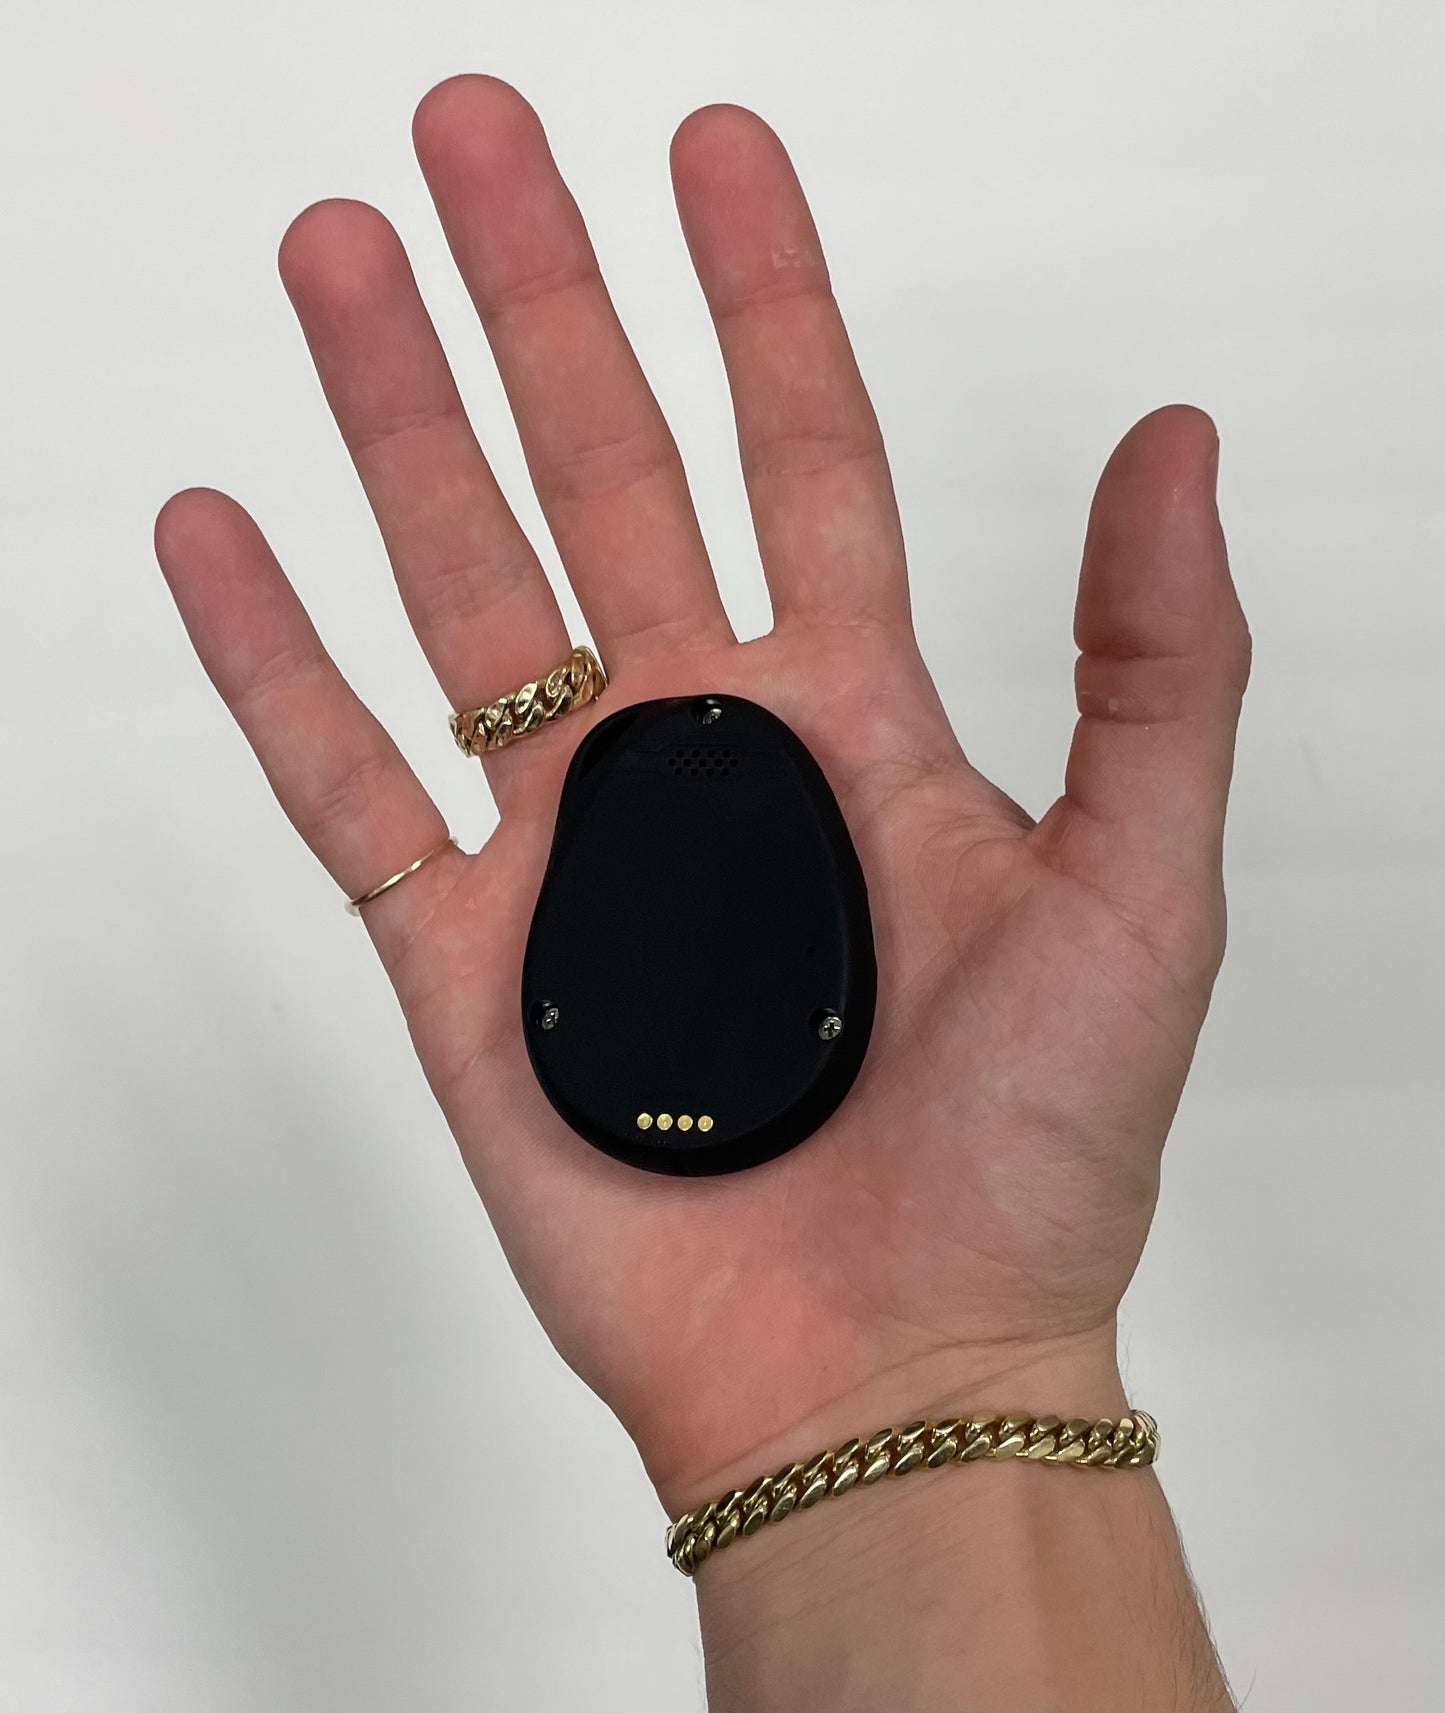 Keychain GPS Tracker-Know the Exact Location Live. For Kids/Elderly/The Disabled. No Monthly